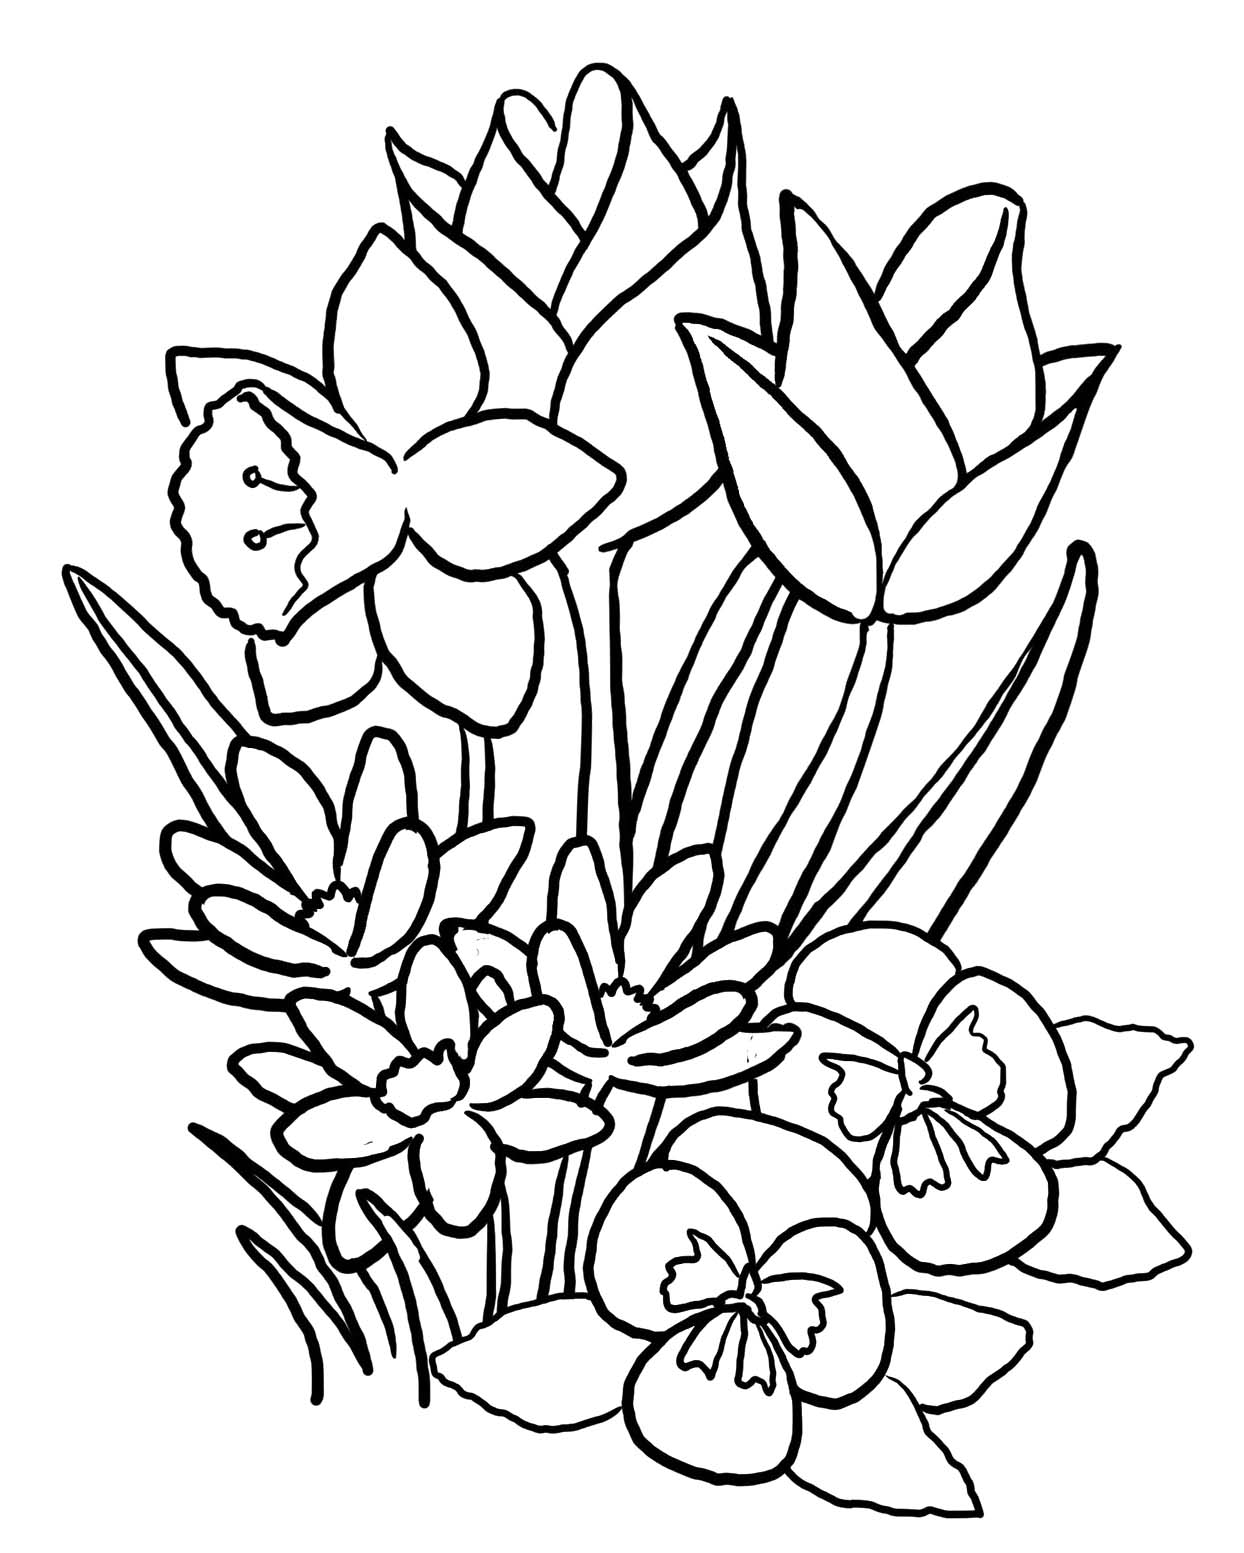 Free Printable Flower Coloring Pages For Kids Best Coloring Pages For Kids Download transparent flower drawing png for free on pngkey.com. free printable flower coloring pages